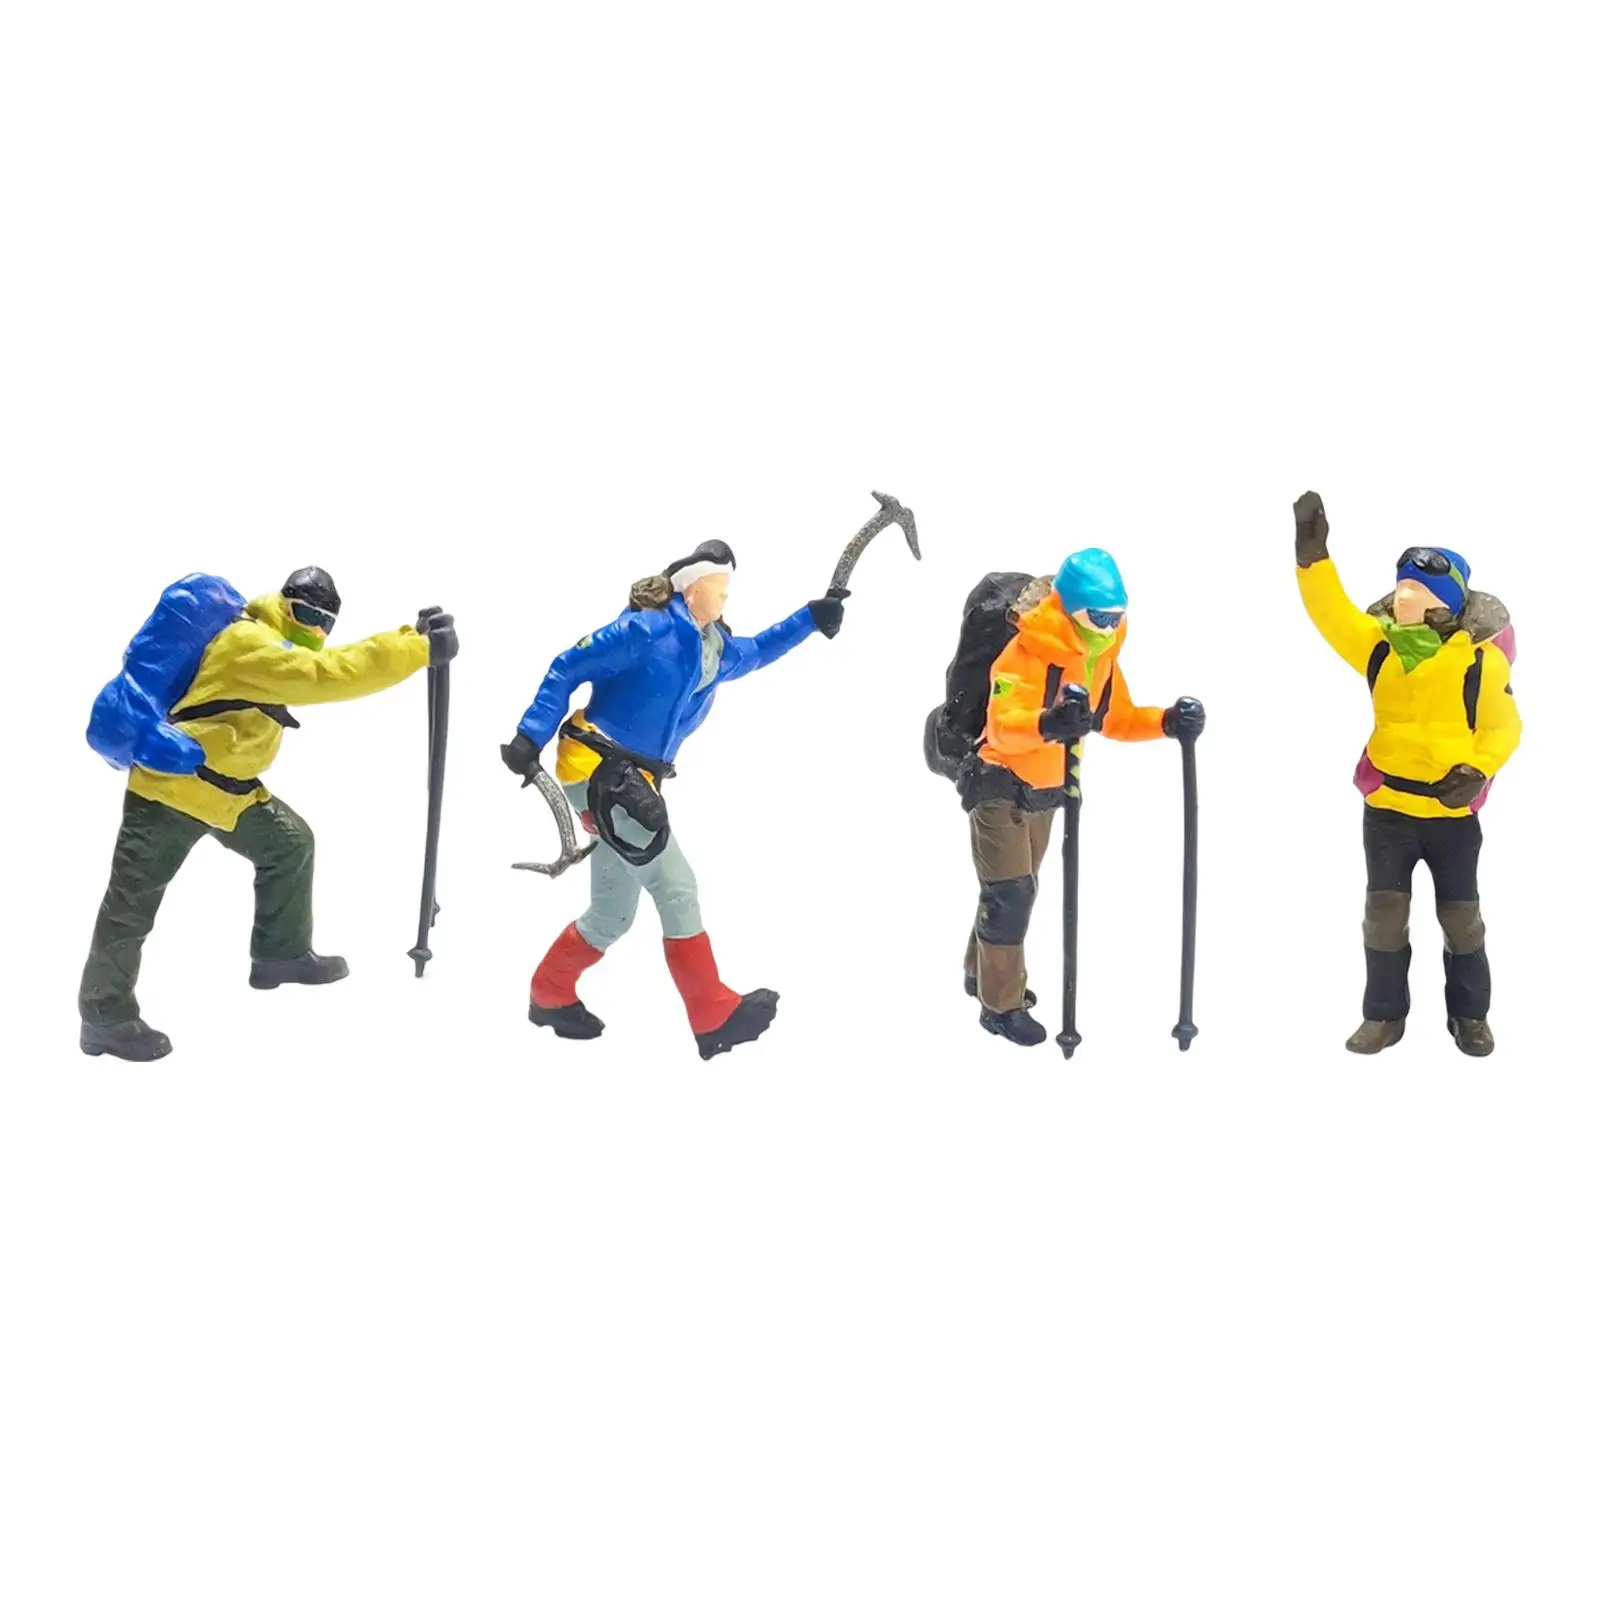 Resin 1/64 Climbing People Figurines Mini People Model for Layout Decoration